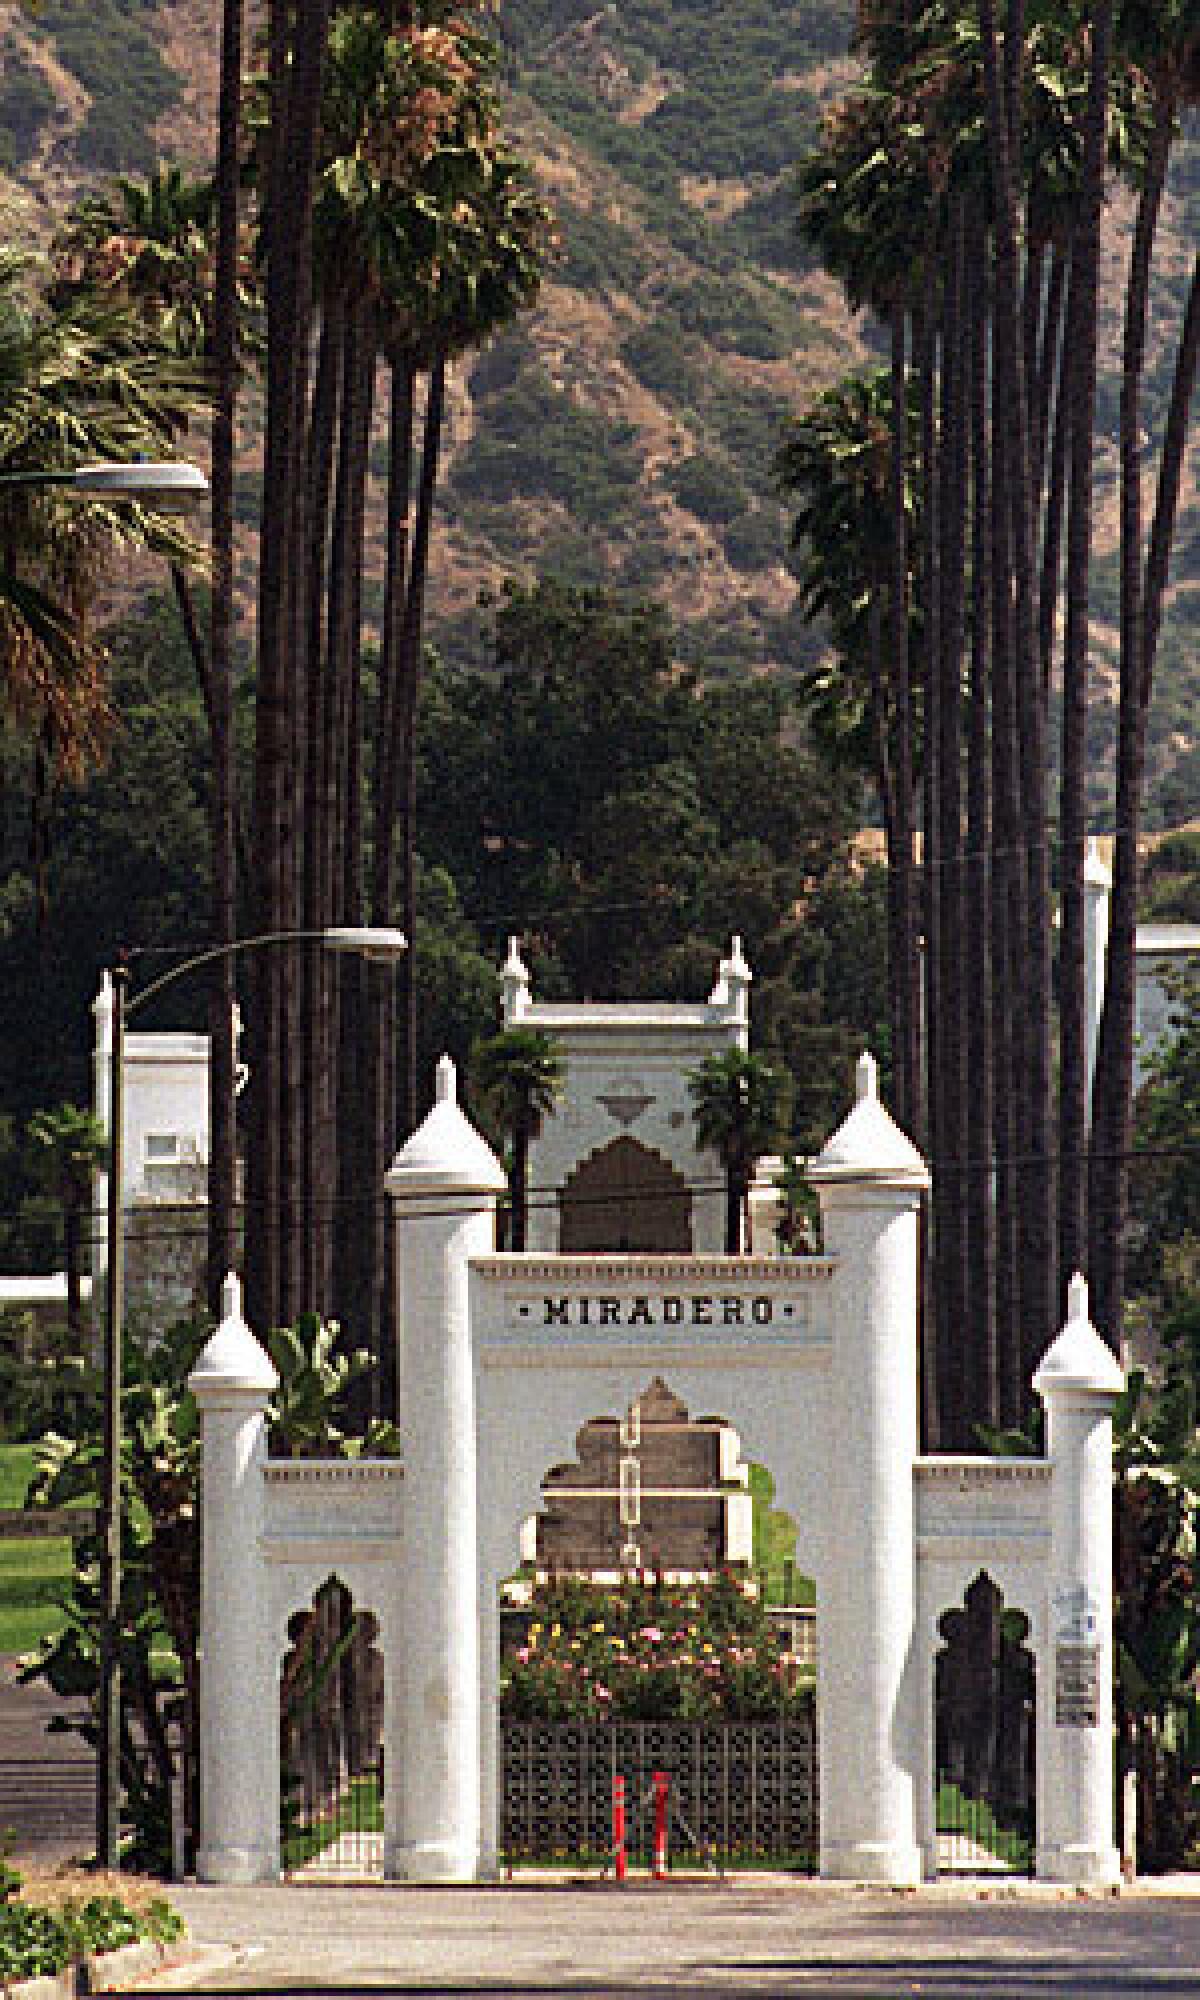 ONE MAN'S CASTLE: The grand entrance to L.C. Brand's summer home in Glendale, El Miradero, is now the Brand Library.